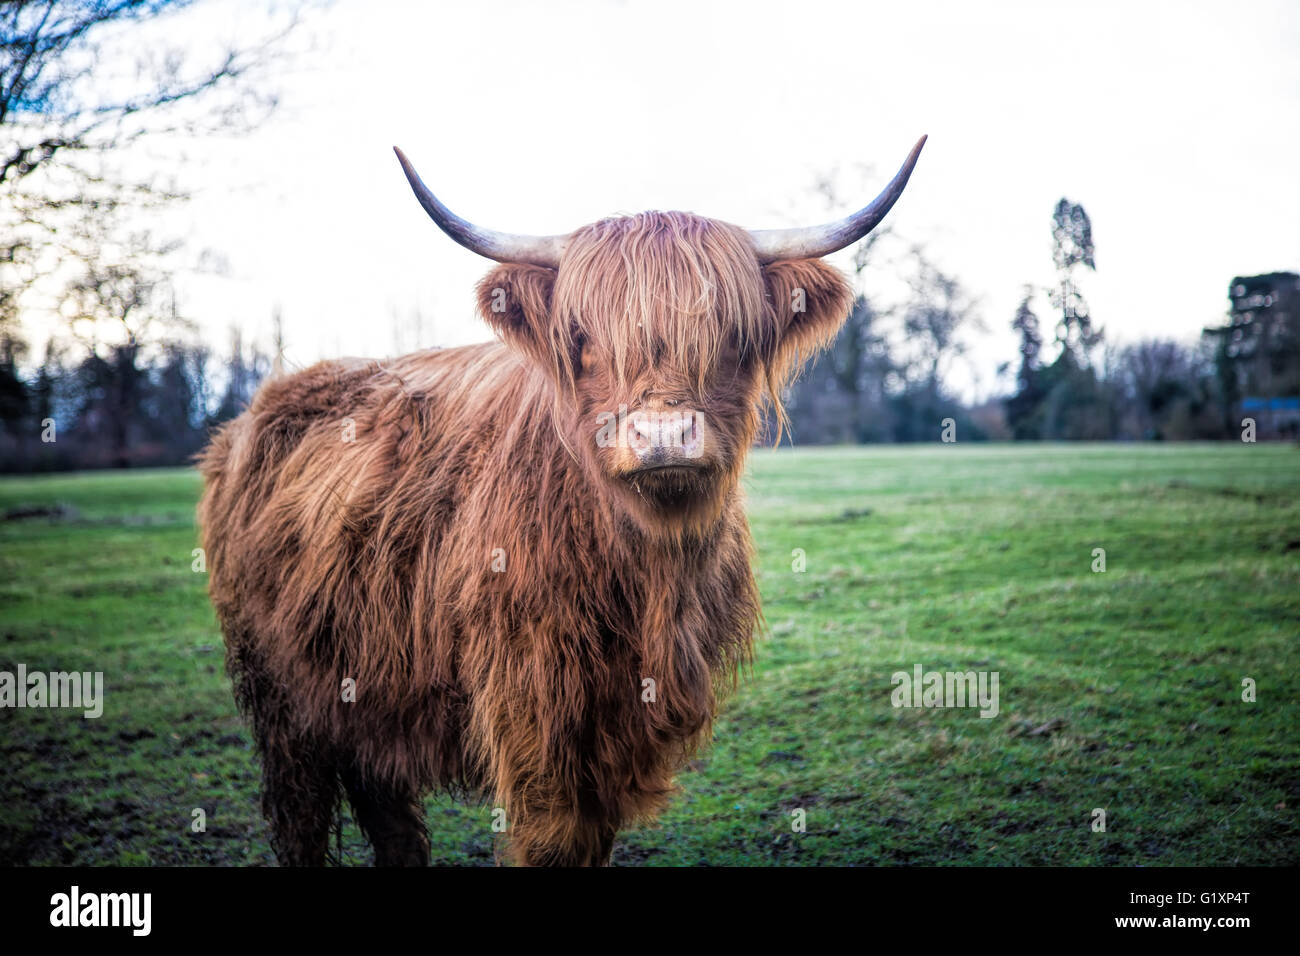 Scottish highland cow in field. Lone cow with large horns in a green field,  shaggy coated cow with hair over eyes, impressive animal Stock Photo - Alamy